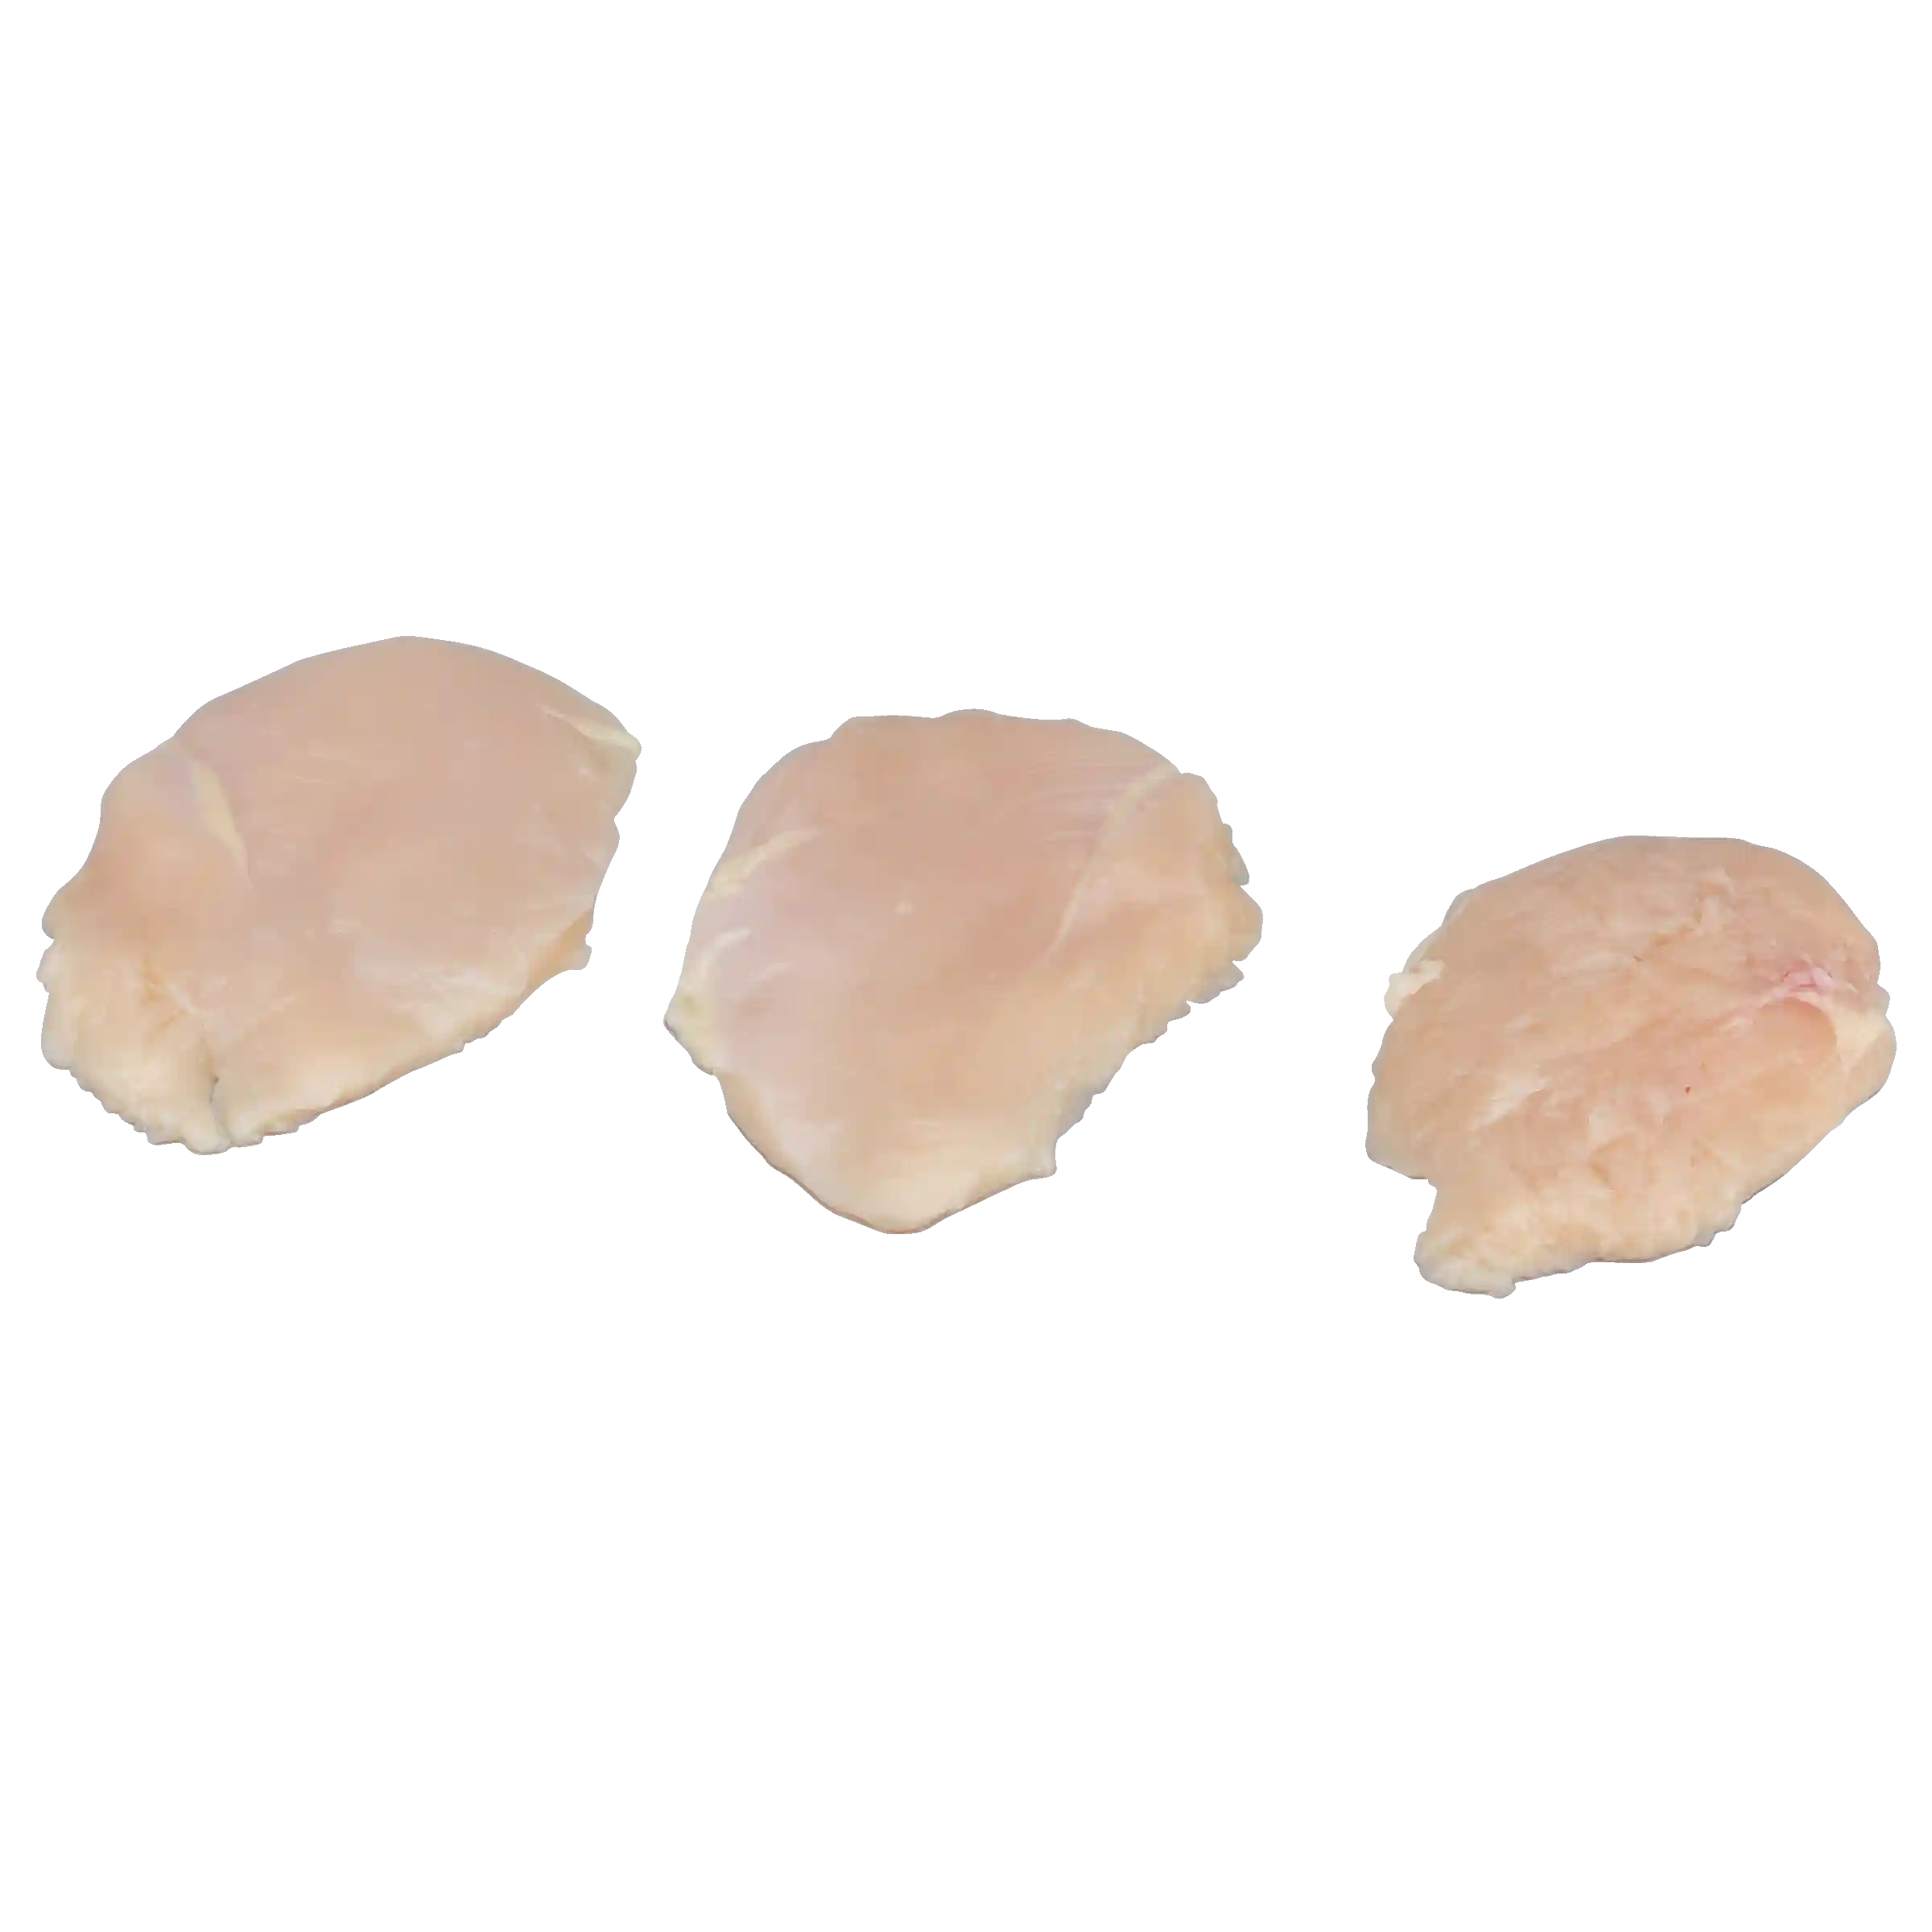 Tyson® All Natural* IF Unbreaded Boneless Skinless Chicken Breast Filets, 5 oz._image_21